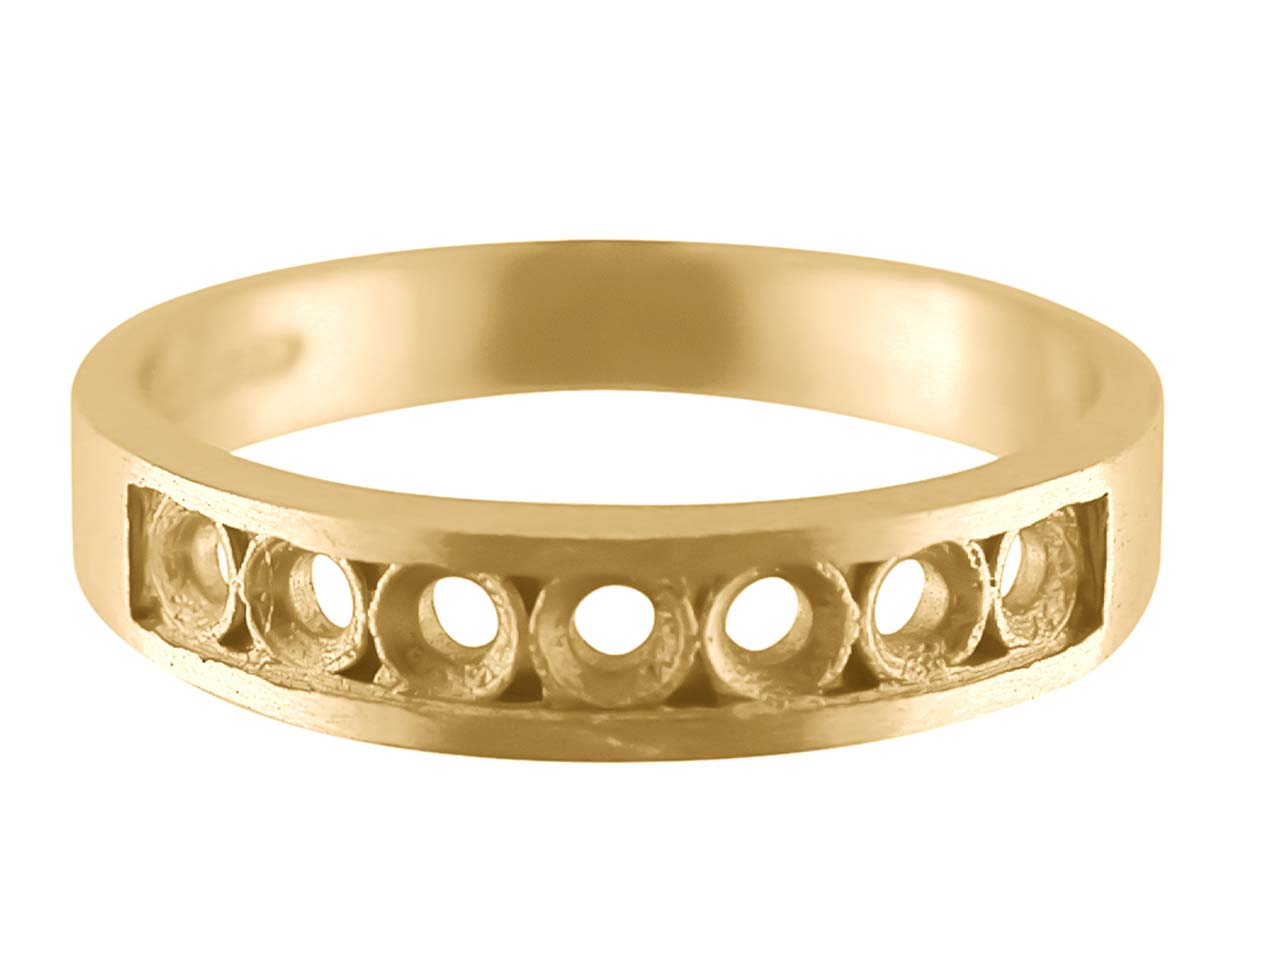 18ct Yellow Gold 7 Stone 1/2 Eternity Ring Hallmarked Size P, 100% Recycled Gold Questions & Answers